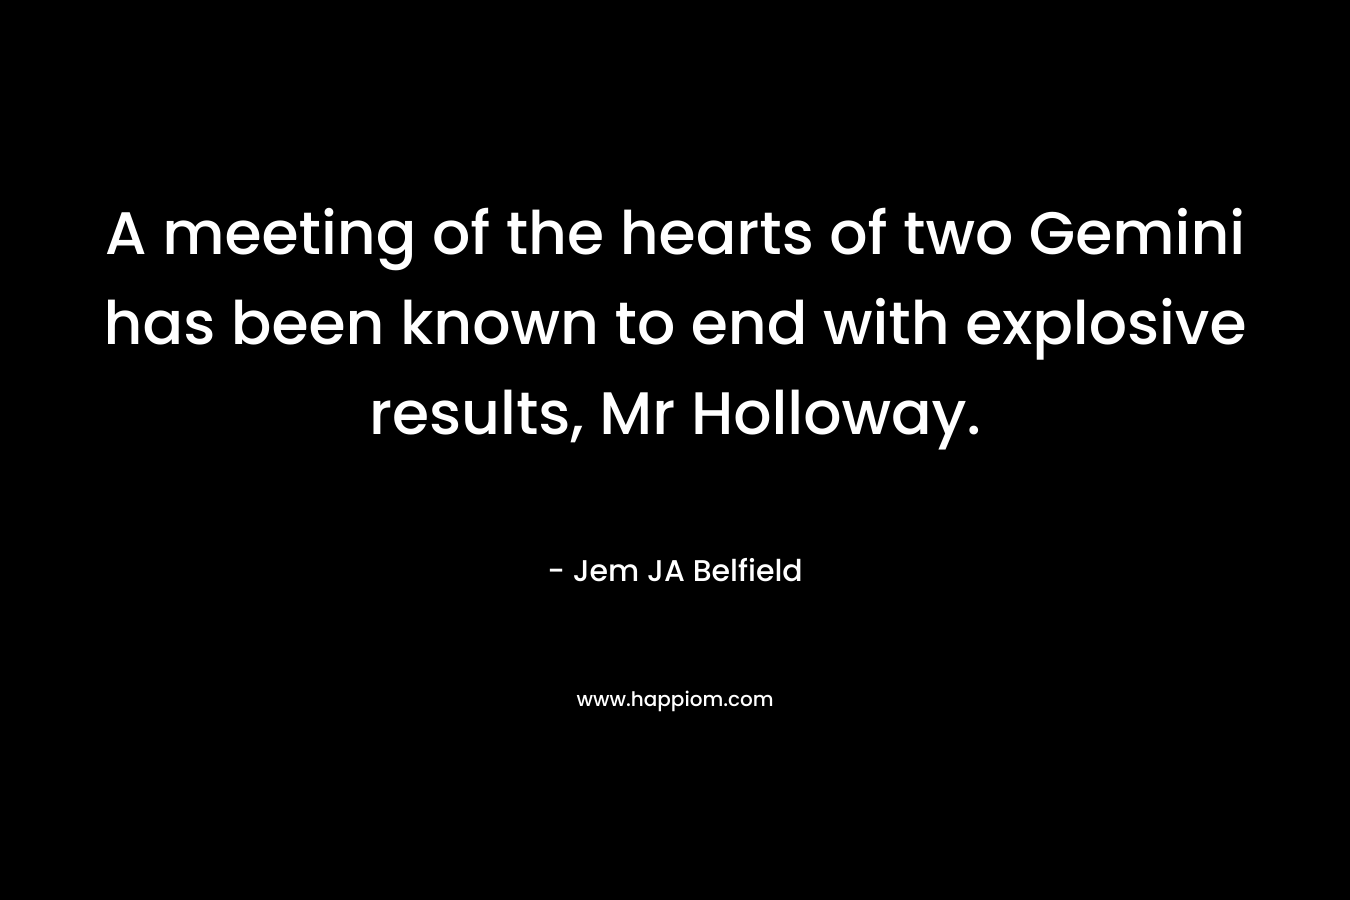 A meeting of the hearts of two Gemini has been known to end with explosive results, Mr Holloway. – Jem JA Belfield